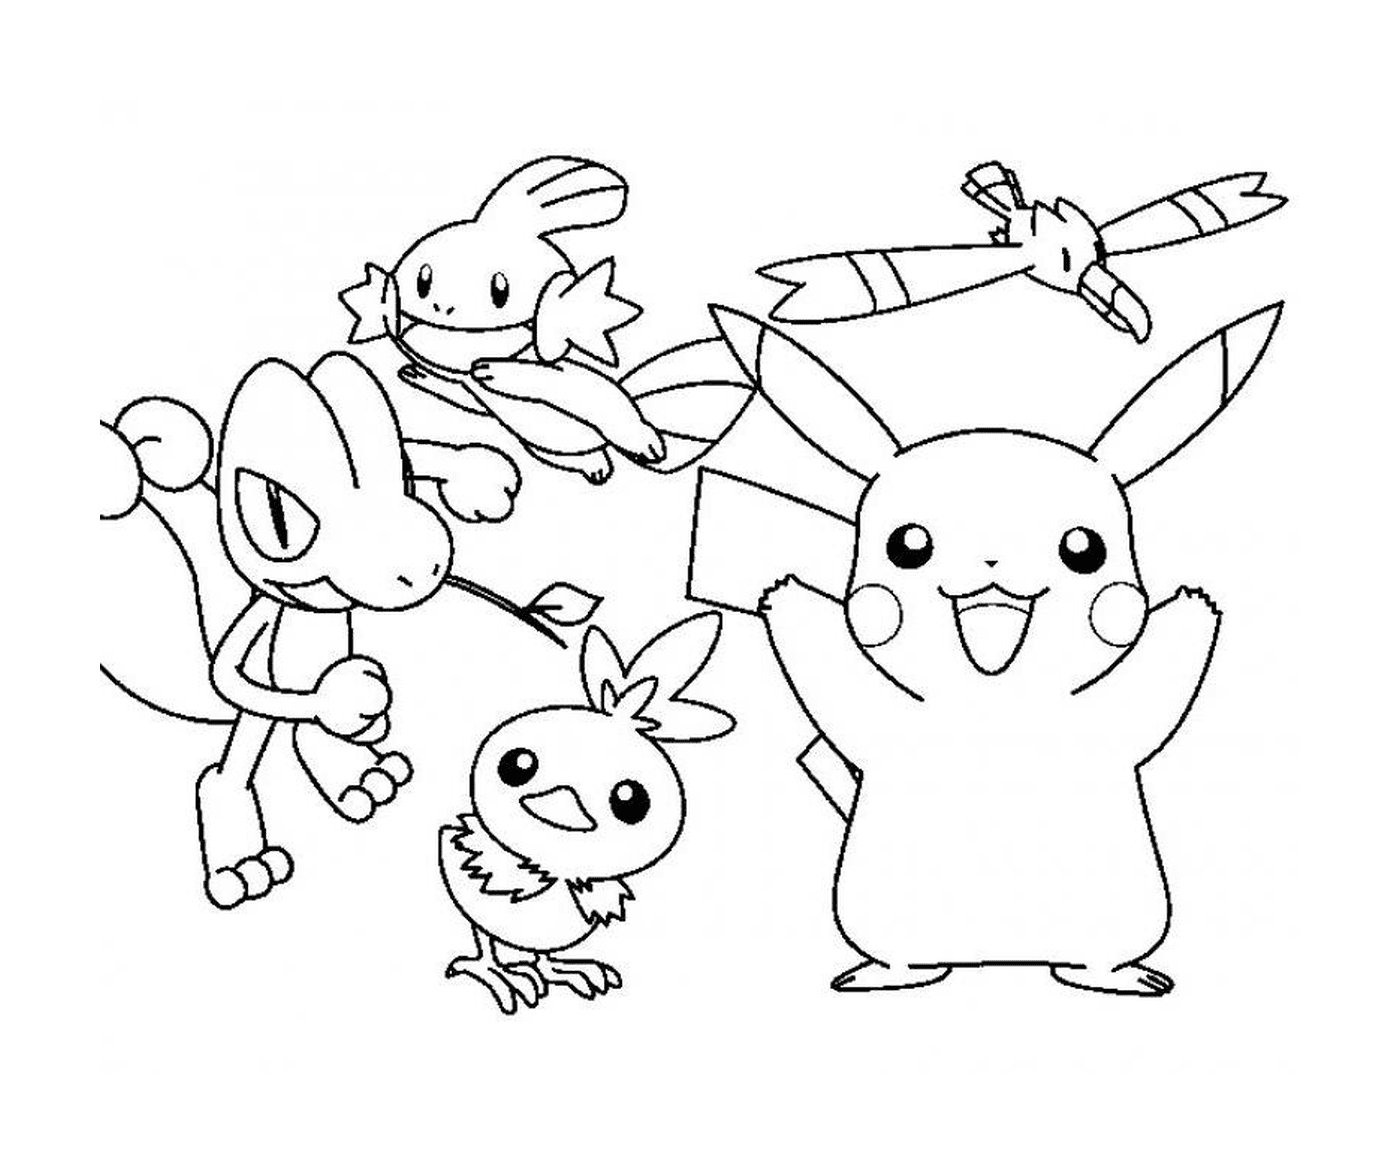  A group of Pokémons in action 